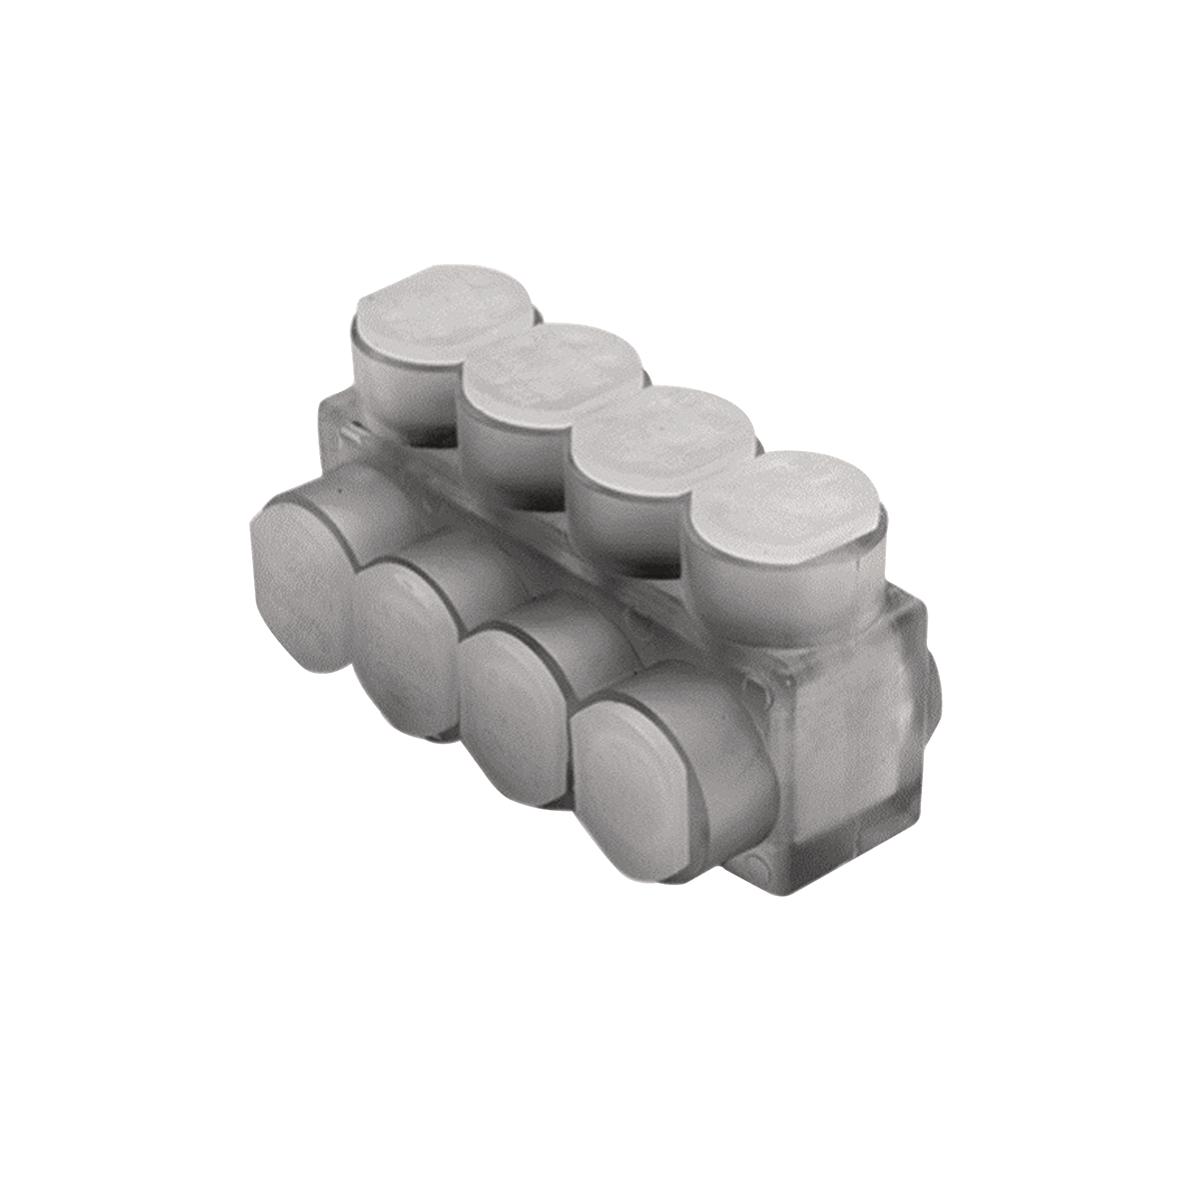 Hubbell BIBD2/010MT Aluminum Multiple Tap Connector W/ Mount Holes, Clear Insulated, 10 Port, 2 Sided Entry, 14-2/0 Awg, Al/Cu Rated. 